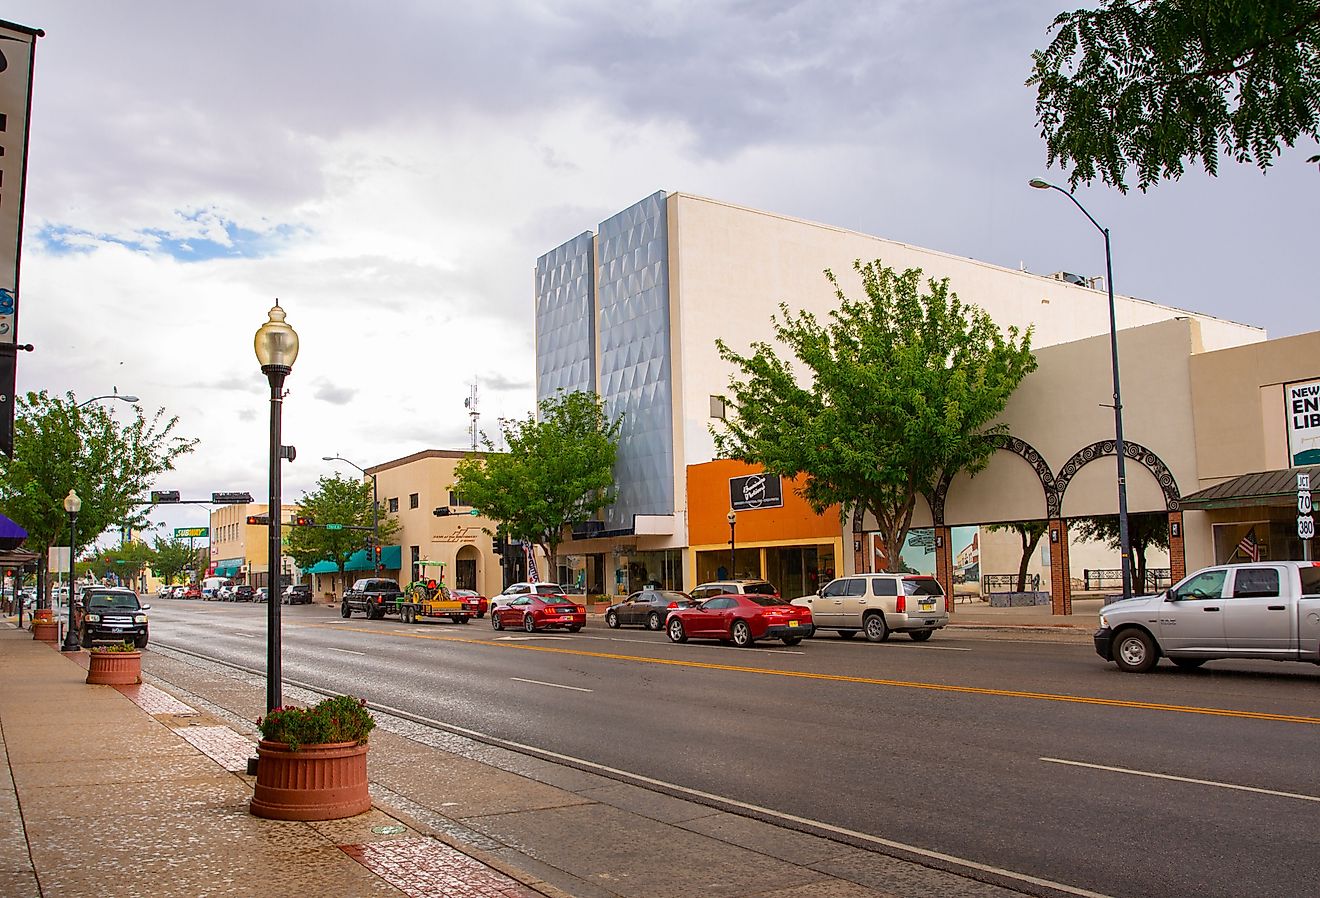 Scenic downtown in Roswell, New Mexico. Image credit Traveller70 via Shutterstock